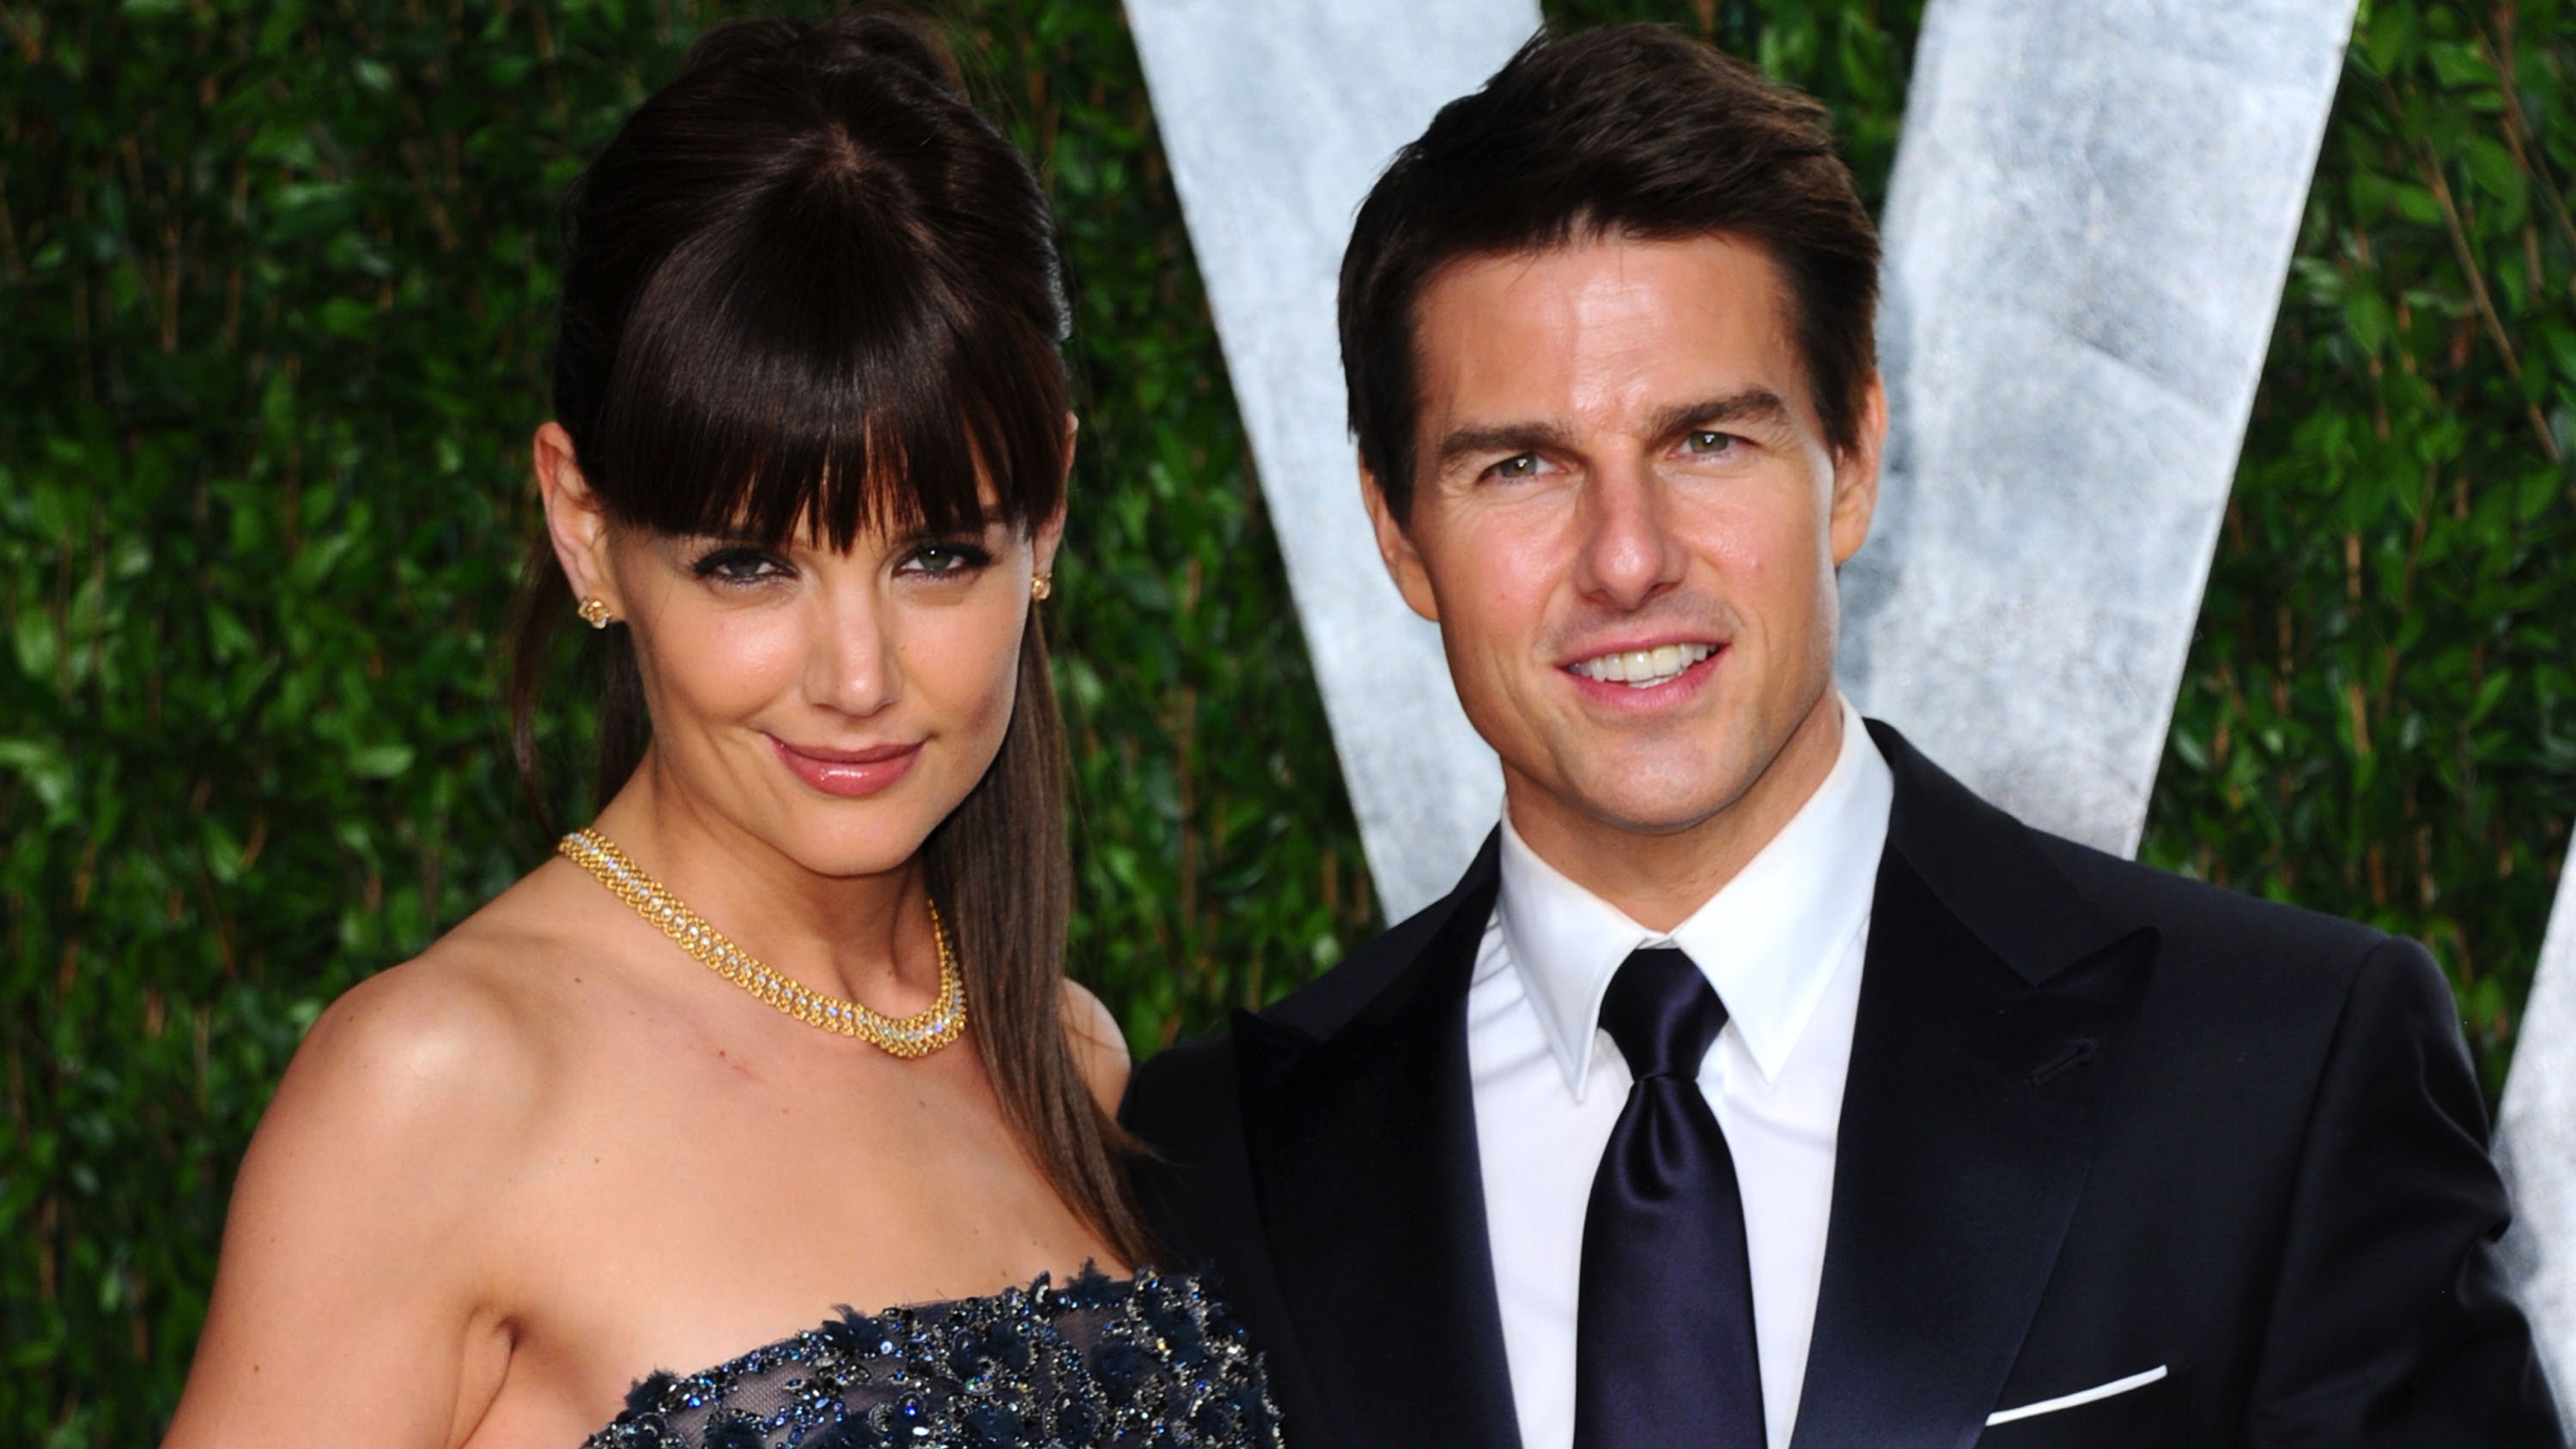 Katie Holmes 'was ready' for Tom Cruise before they met, claims